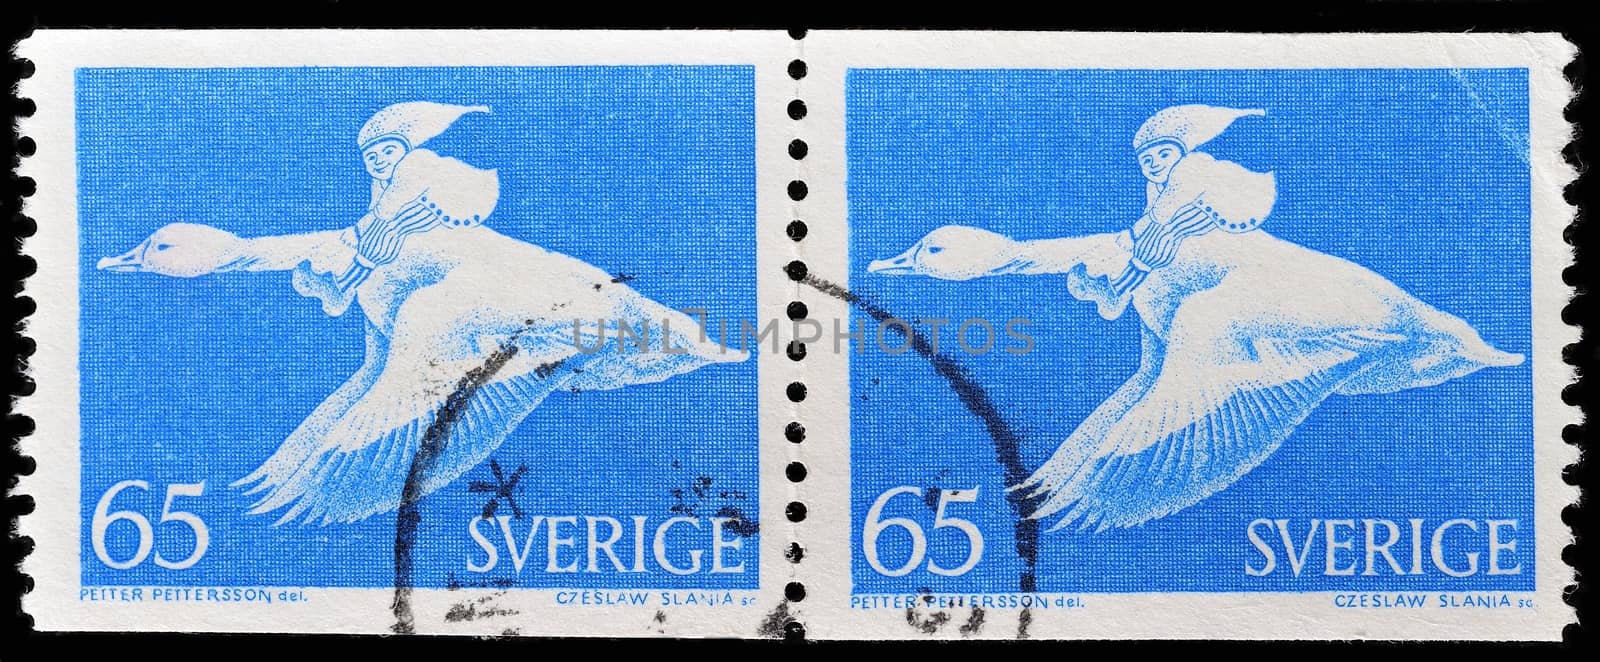 SWEDEN - CIRCA 1967: a stamp printed in the Sweden shows Nils Holgersson Riding Wild Goose, circa 1967